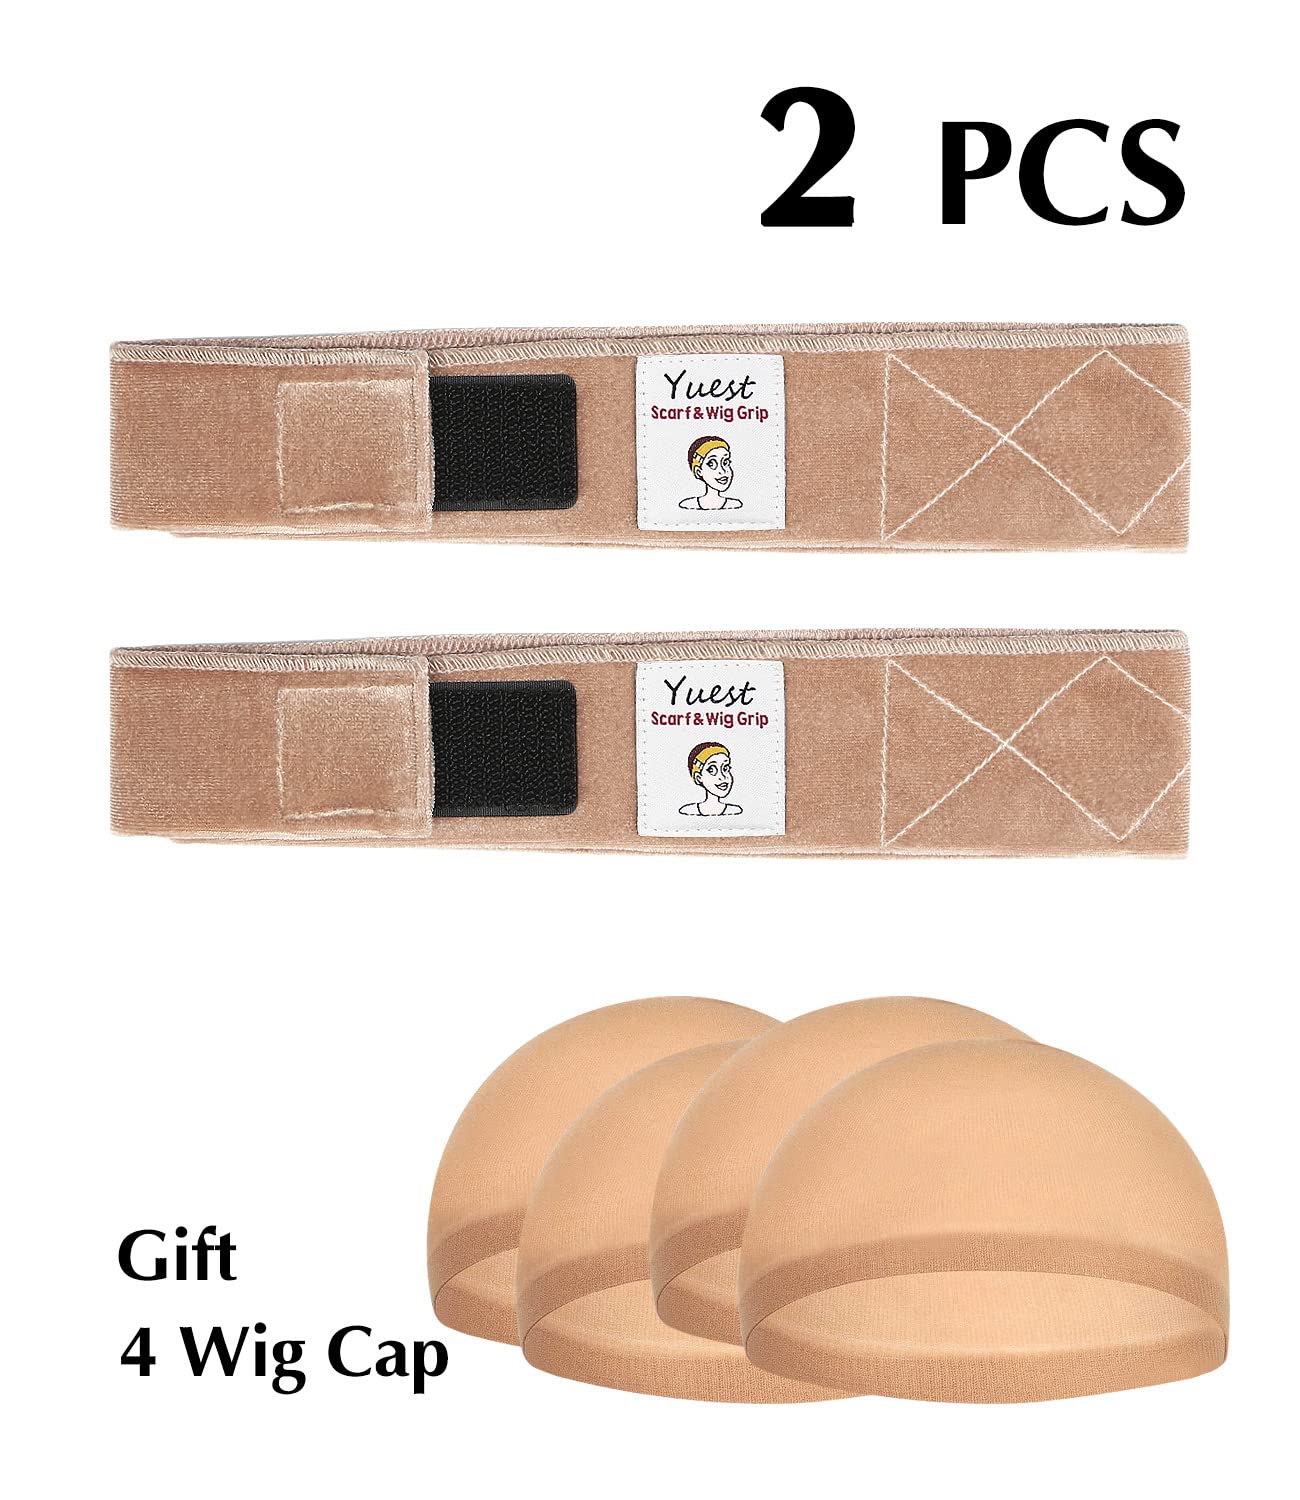 Yuest 2 Pack Wig Grip Band for Keeping Wigs in Place Secured Velvet Wig Gripper Adjustable Wig Grips Headband Stay Put No Slip Accessories for Women Edge Saver